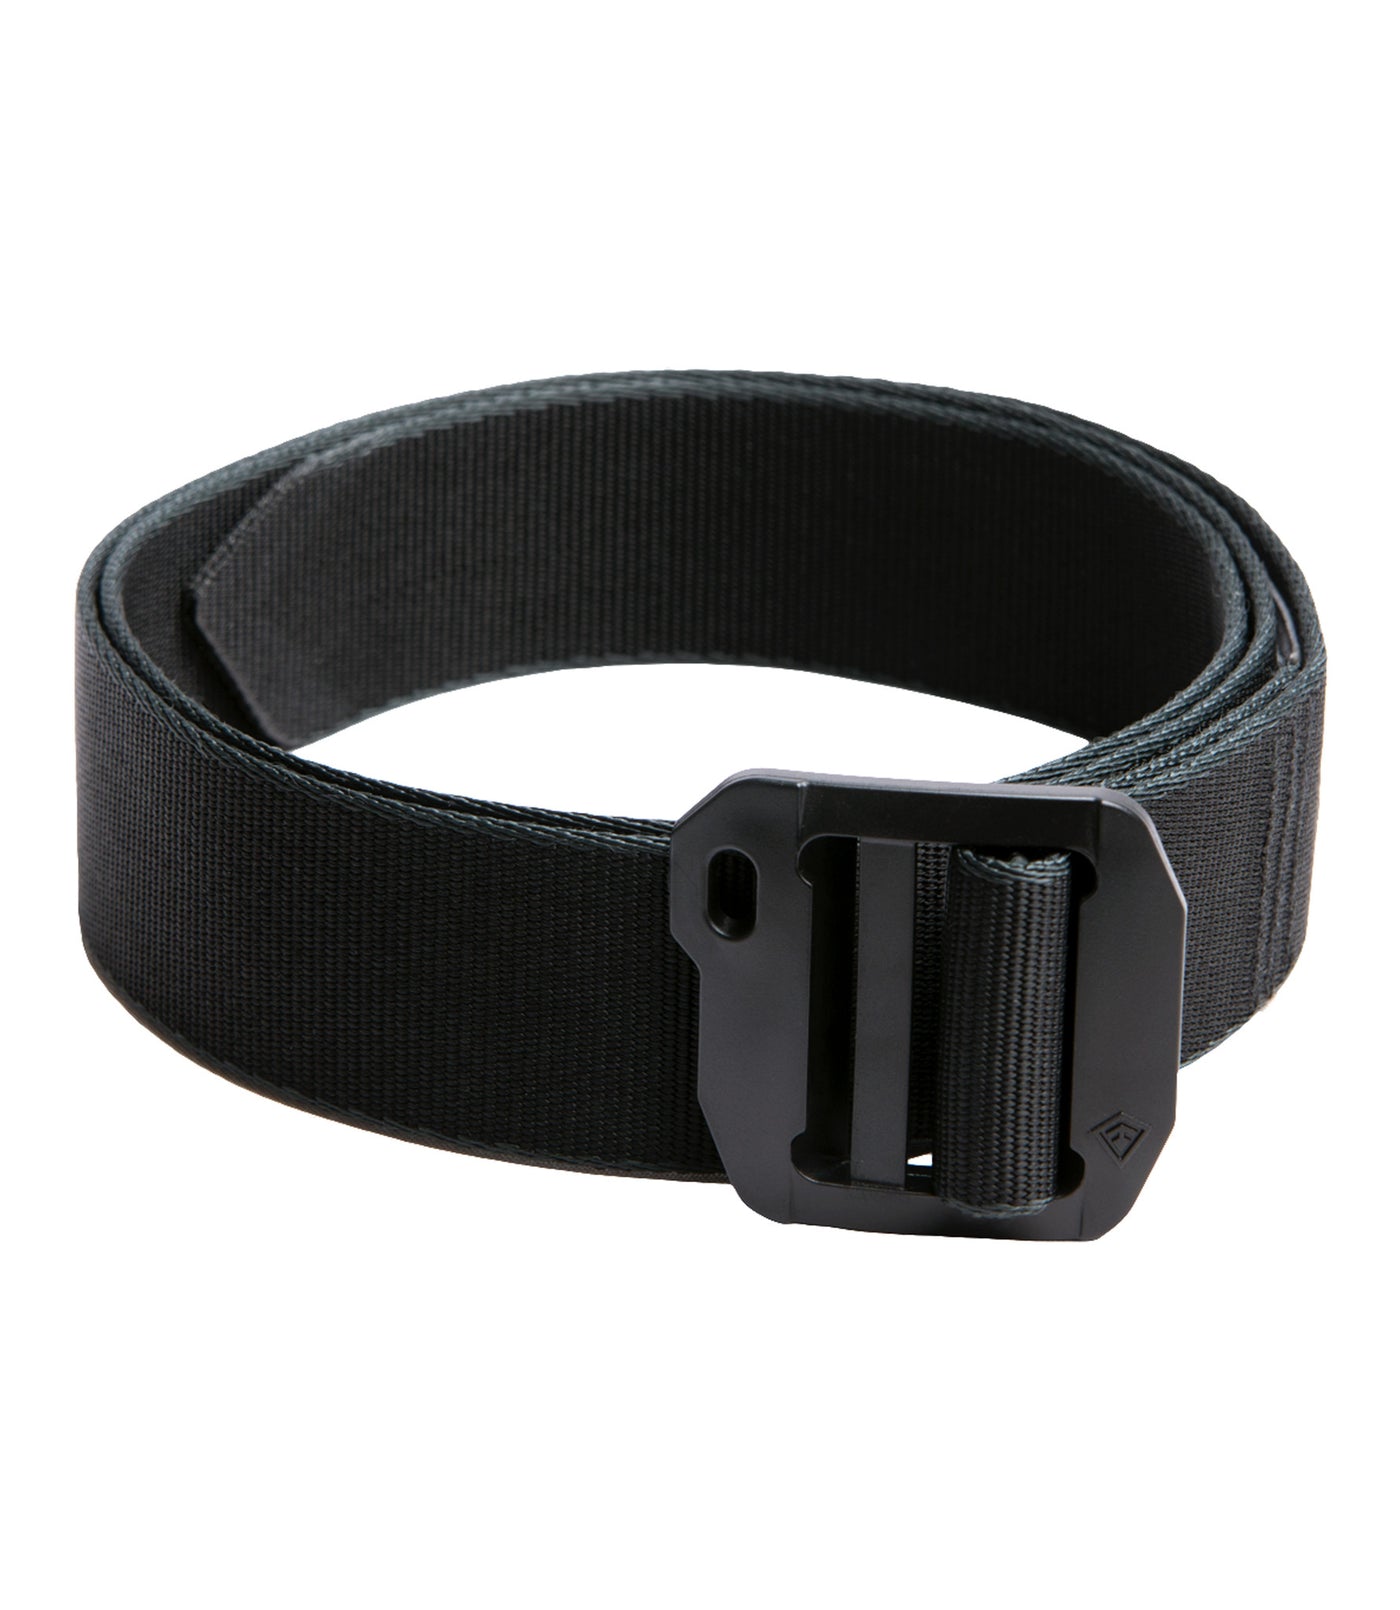 First Tactical Cobra Belt 1.5in Black Small 143020-019-S